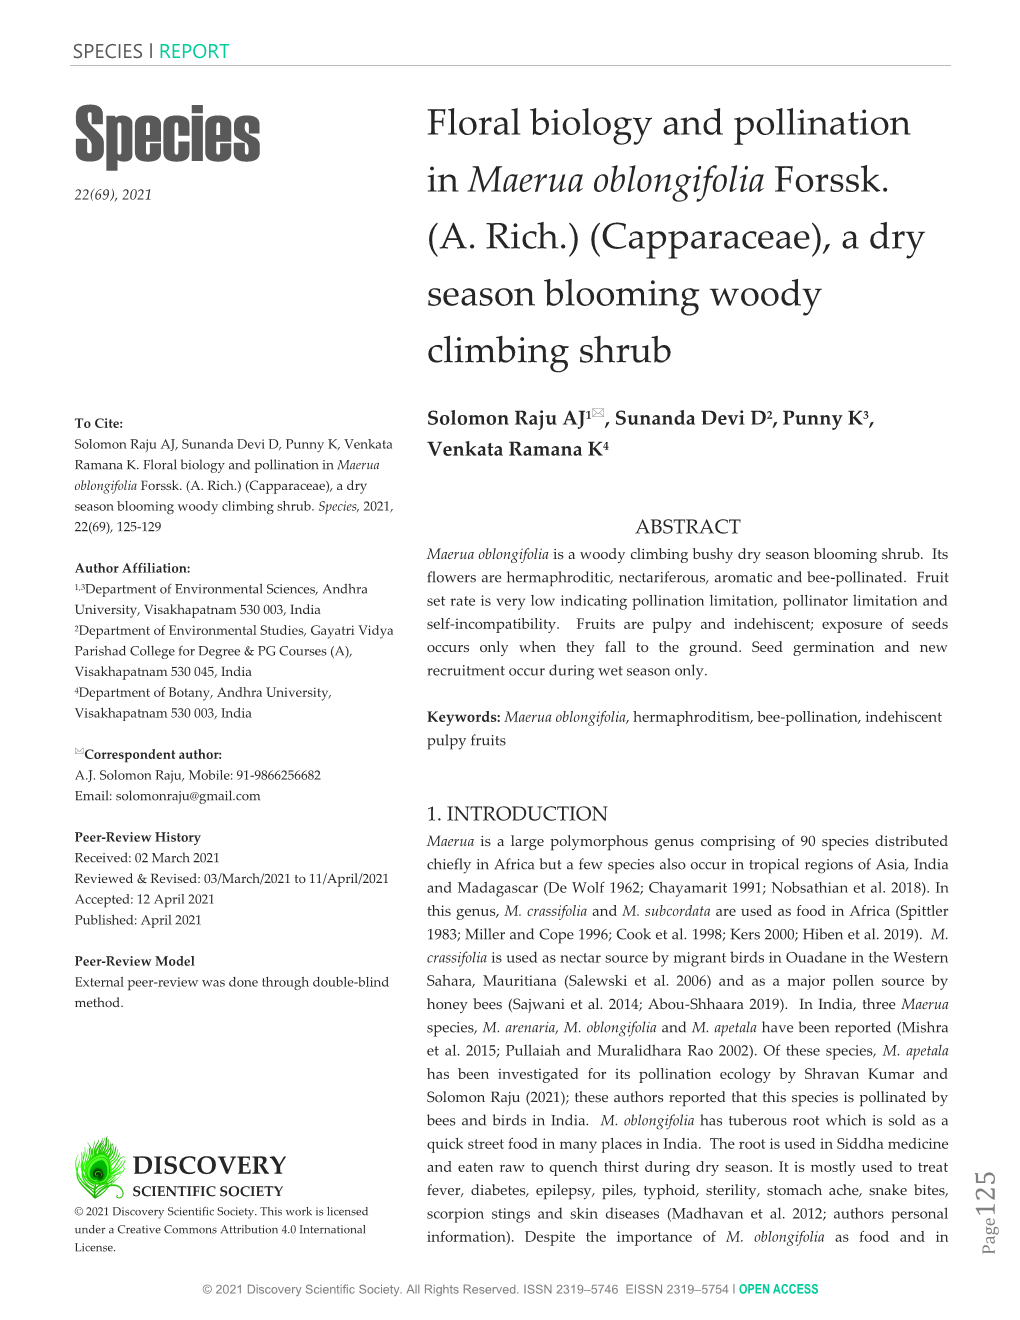 Floral Biology and Pollination in Maerua Oblongifolia Forssk. (A